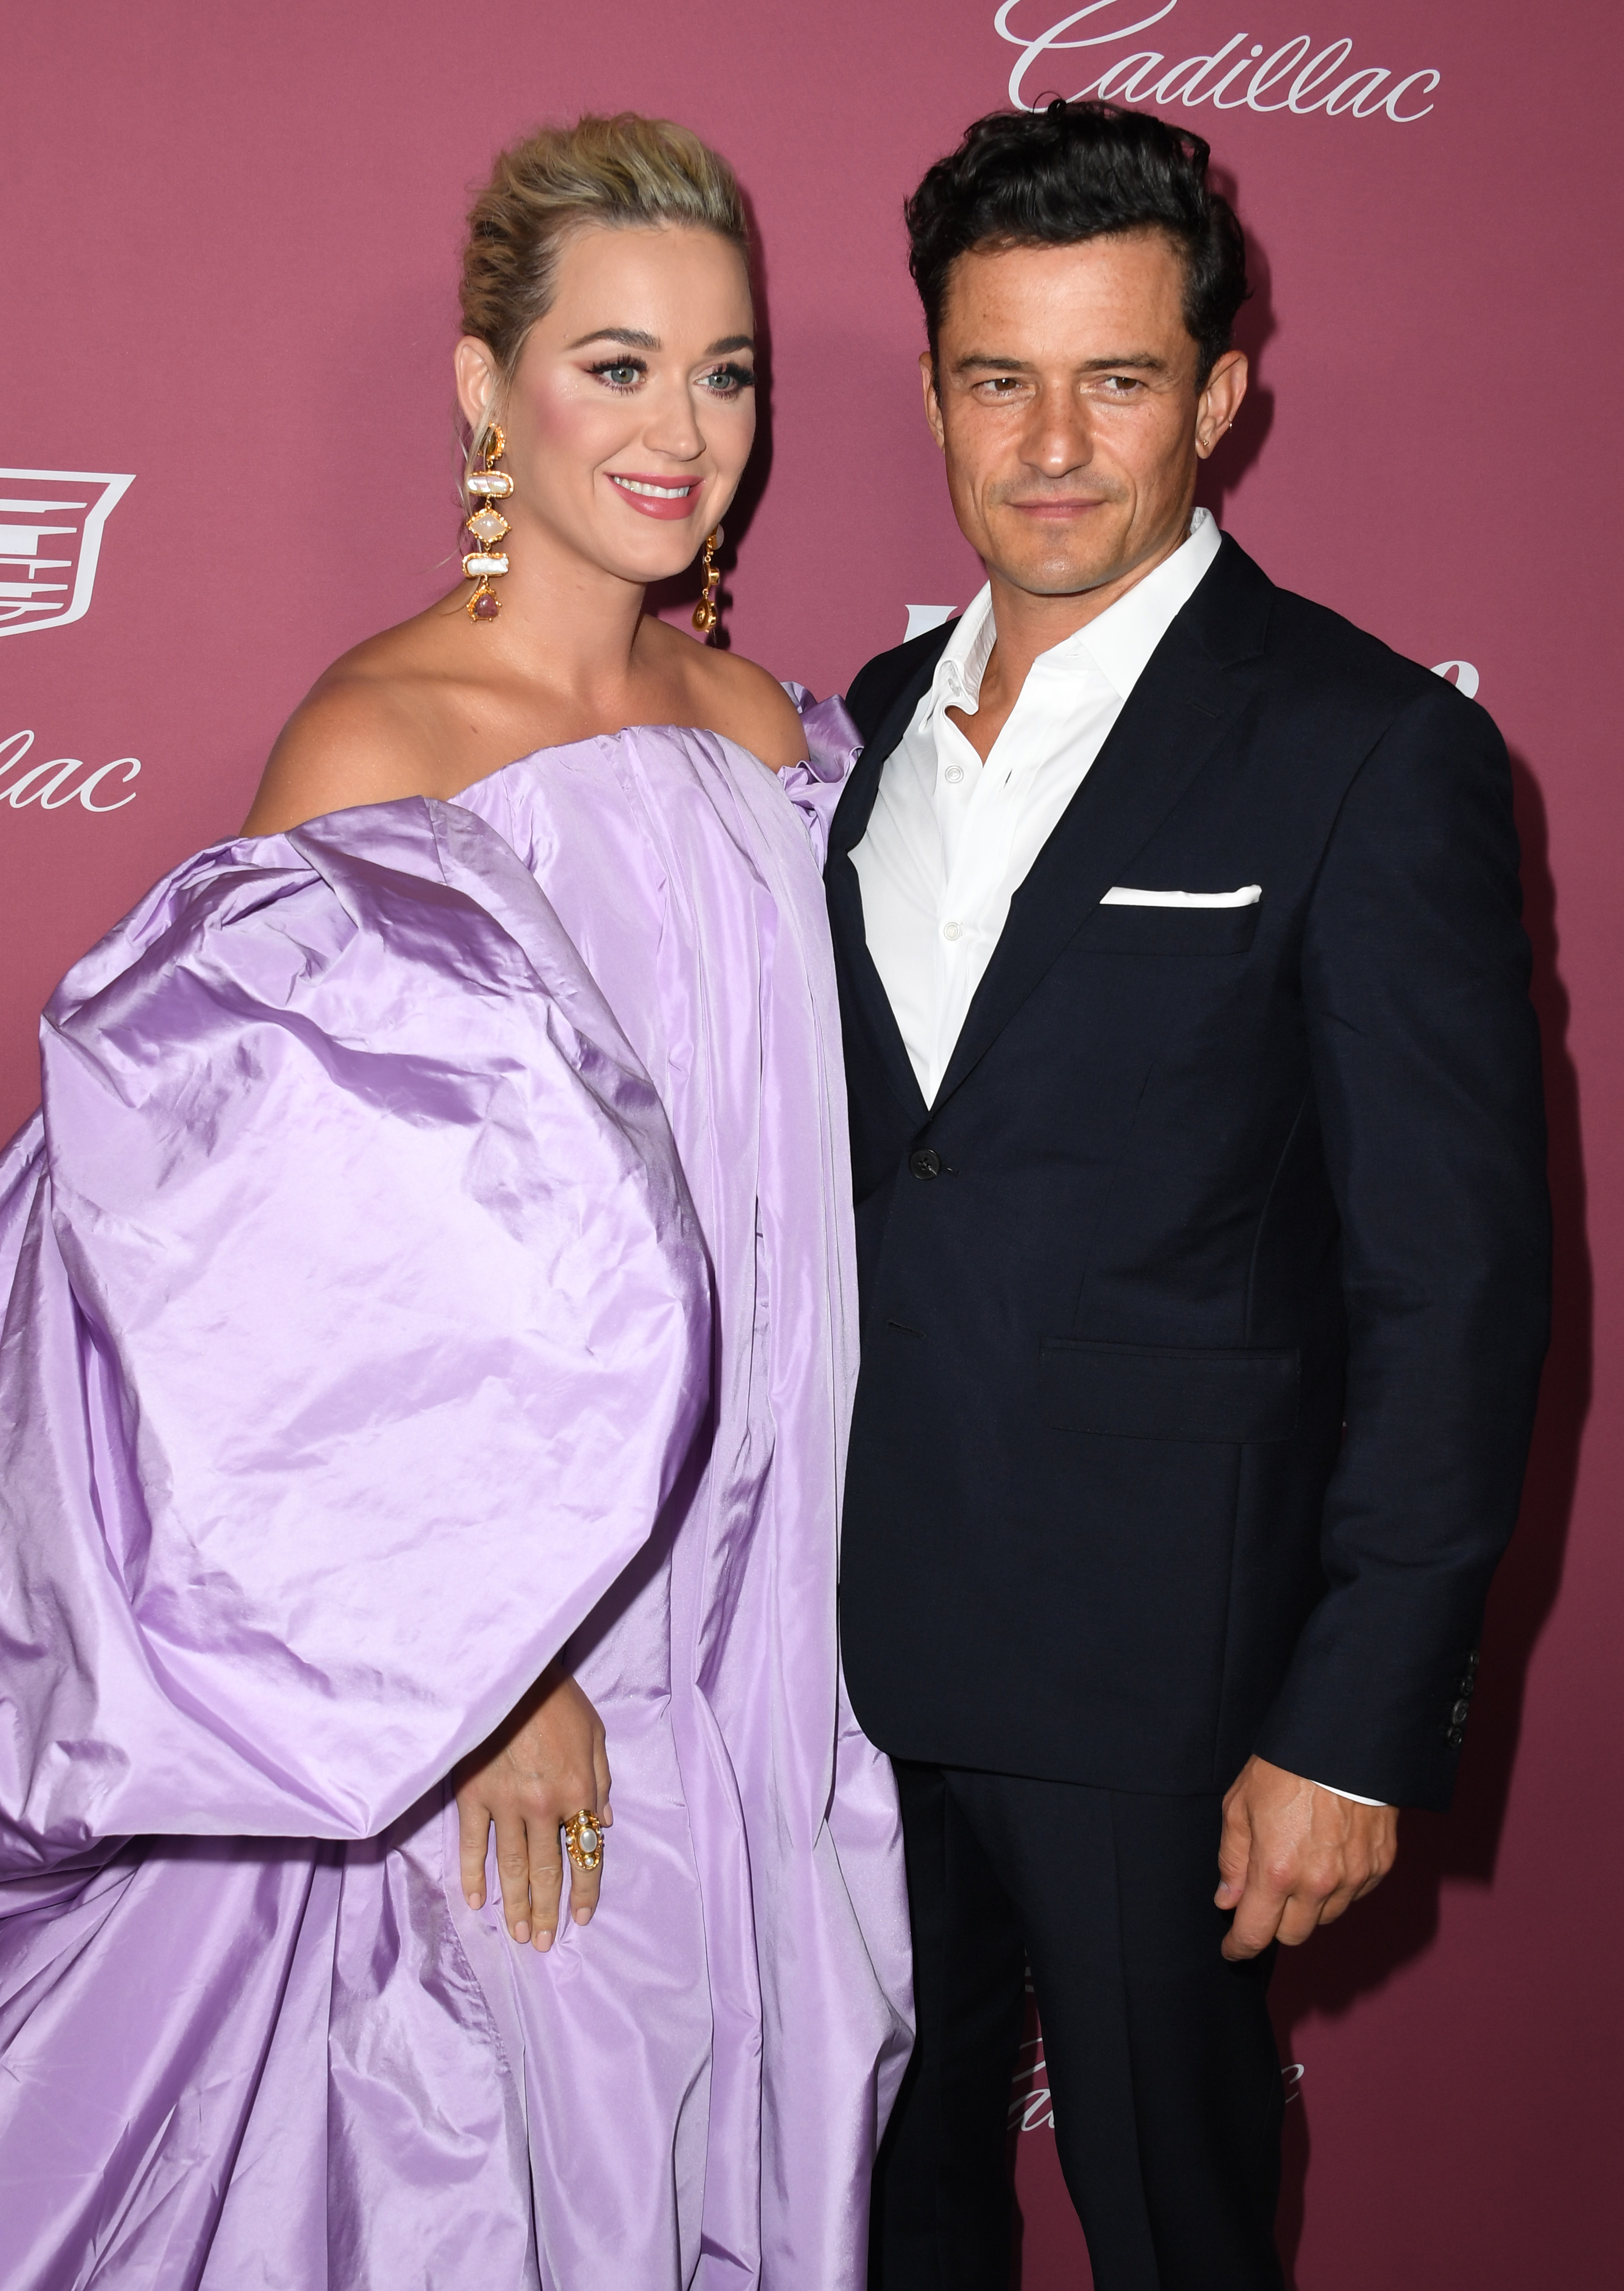 Katy shares her daughter with her fiance, Orlando Bloom